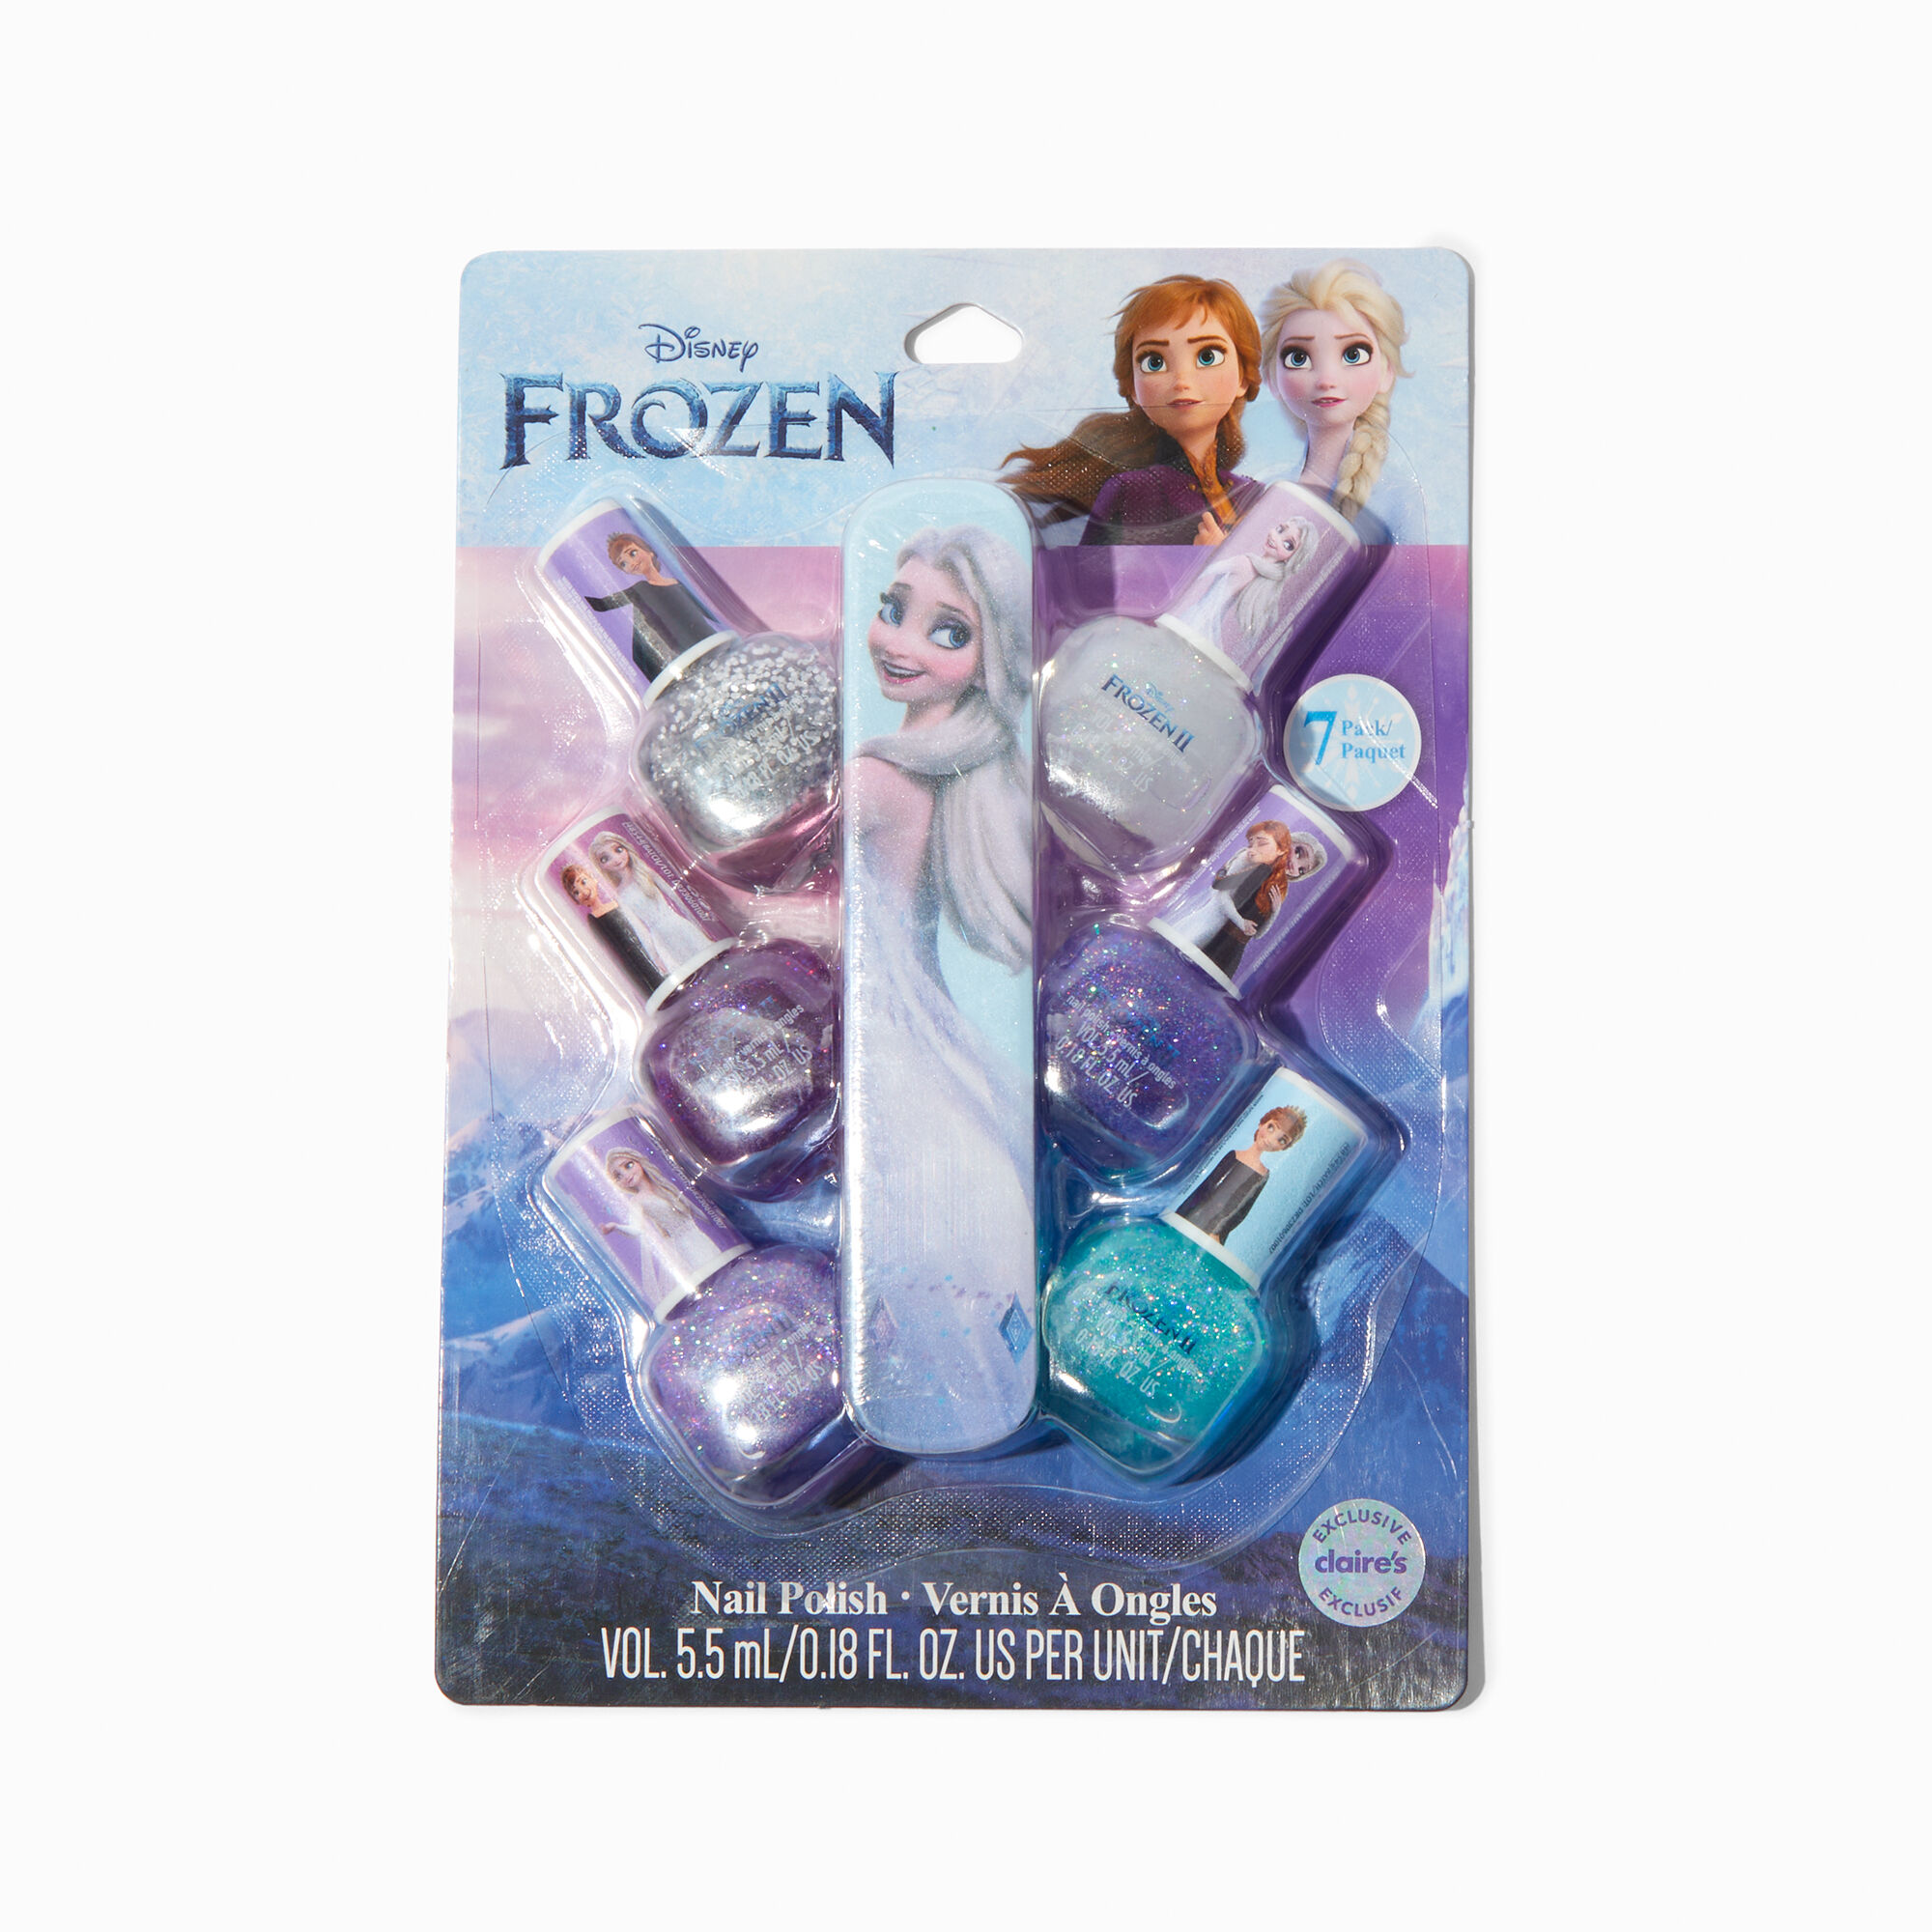 View Disney Frozen 2 Claires Exclusive File And Nail Varnish 7 Pack information